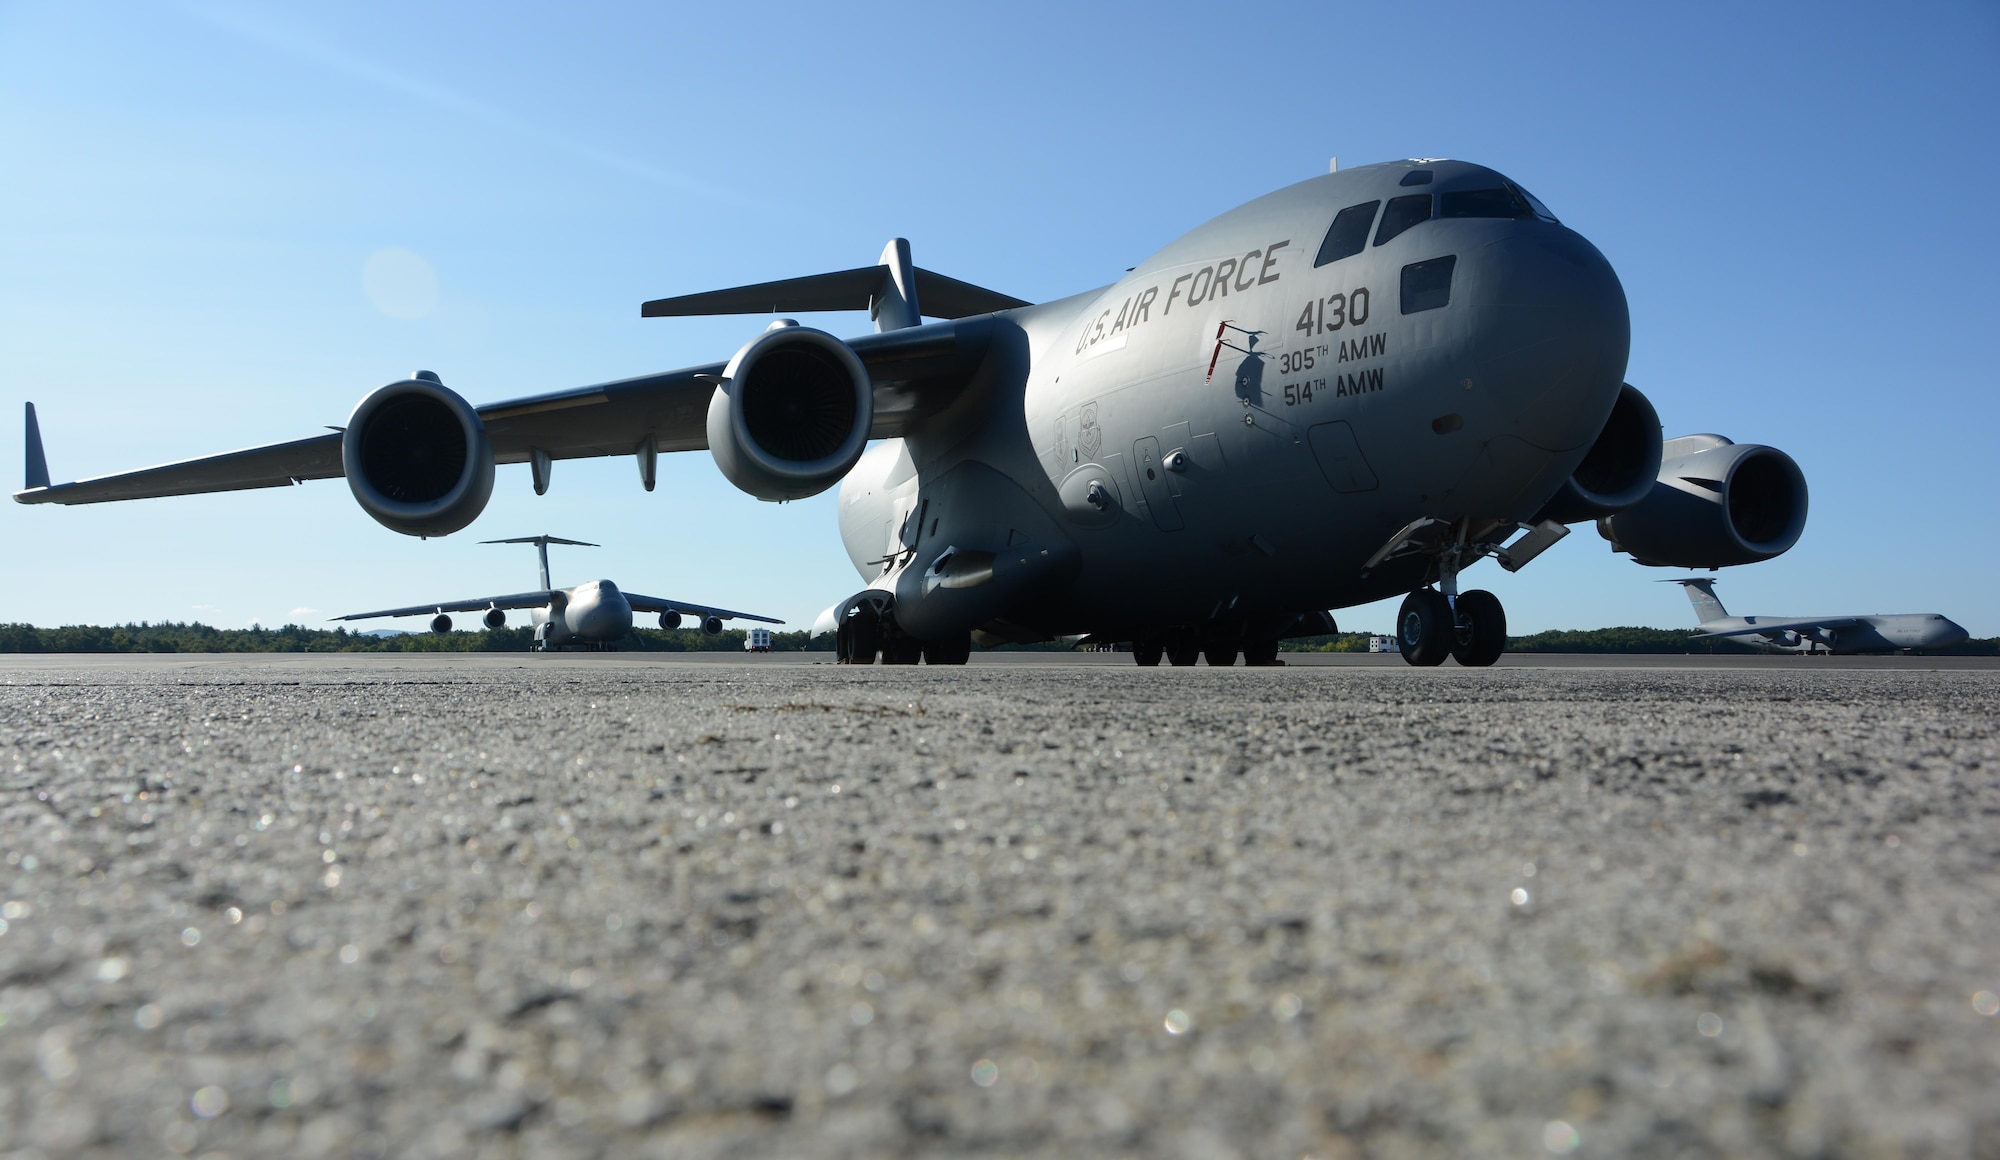 A C-17 Globemaster III sits on the flightline September 9, 2017, at Westover Air Reserve Base, Mass. Three C-17s from Joint Base McGuire-Dix-Lakehurst, New Jersey, Joint Base Lewis-McChord, Washington and March ARB, California, await the loading of Federal Emergency Management Agency supplies by Westover's Aerial Port Squadrons to support those impacted by Hurricane Irma. (U.S. Air Force photo by Airman Hanna N. Smith)